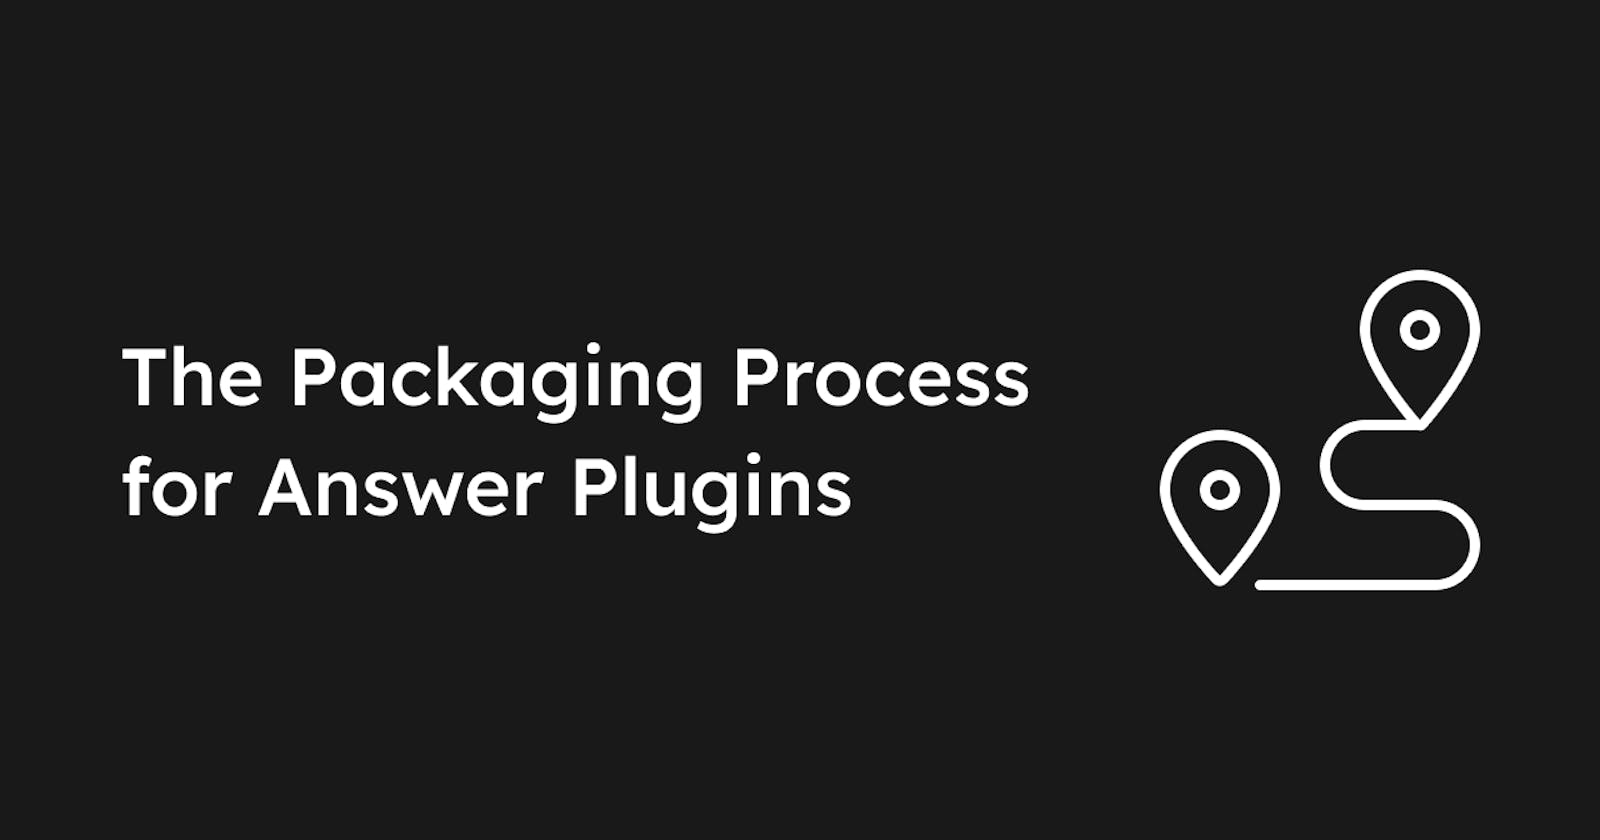 The Packaging Process for Answer Plugins